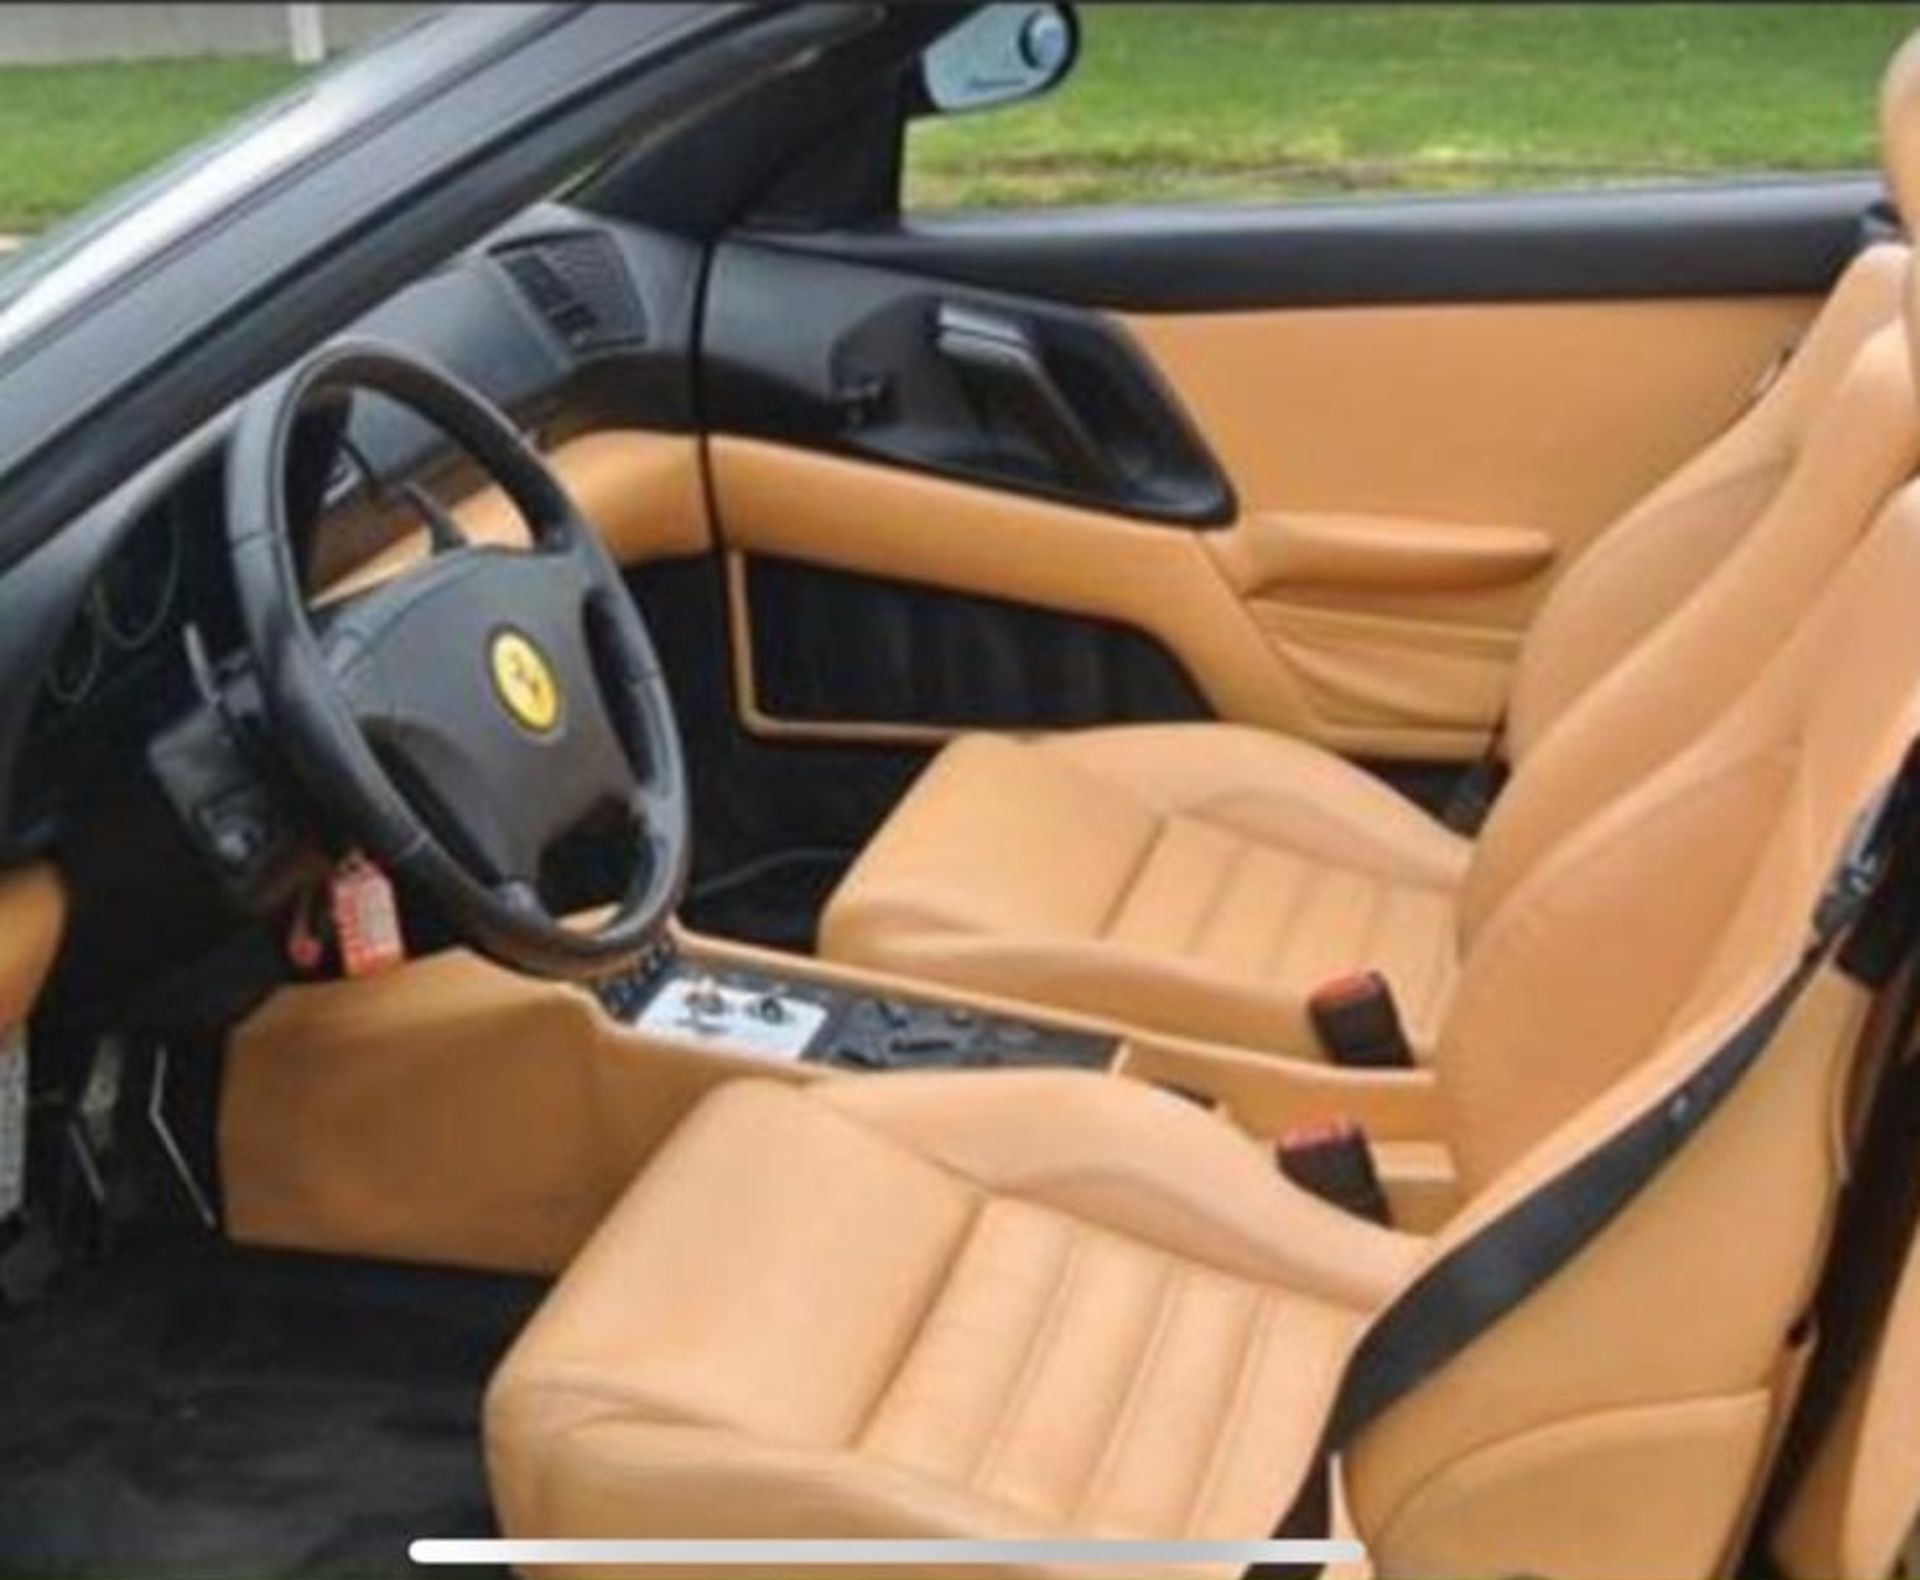 IMMACULATE 1999 FERRARI 355 F1 SPIDER WITH GENUINE LOW MILEAGE & FULL COMPREHENSIVE SERVICE HISTORY - Image 9 of 10